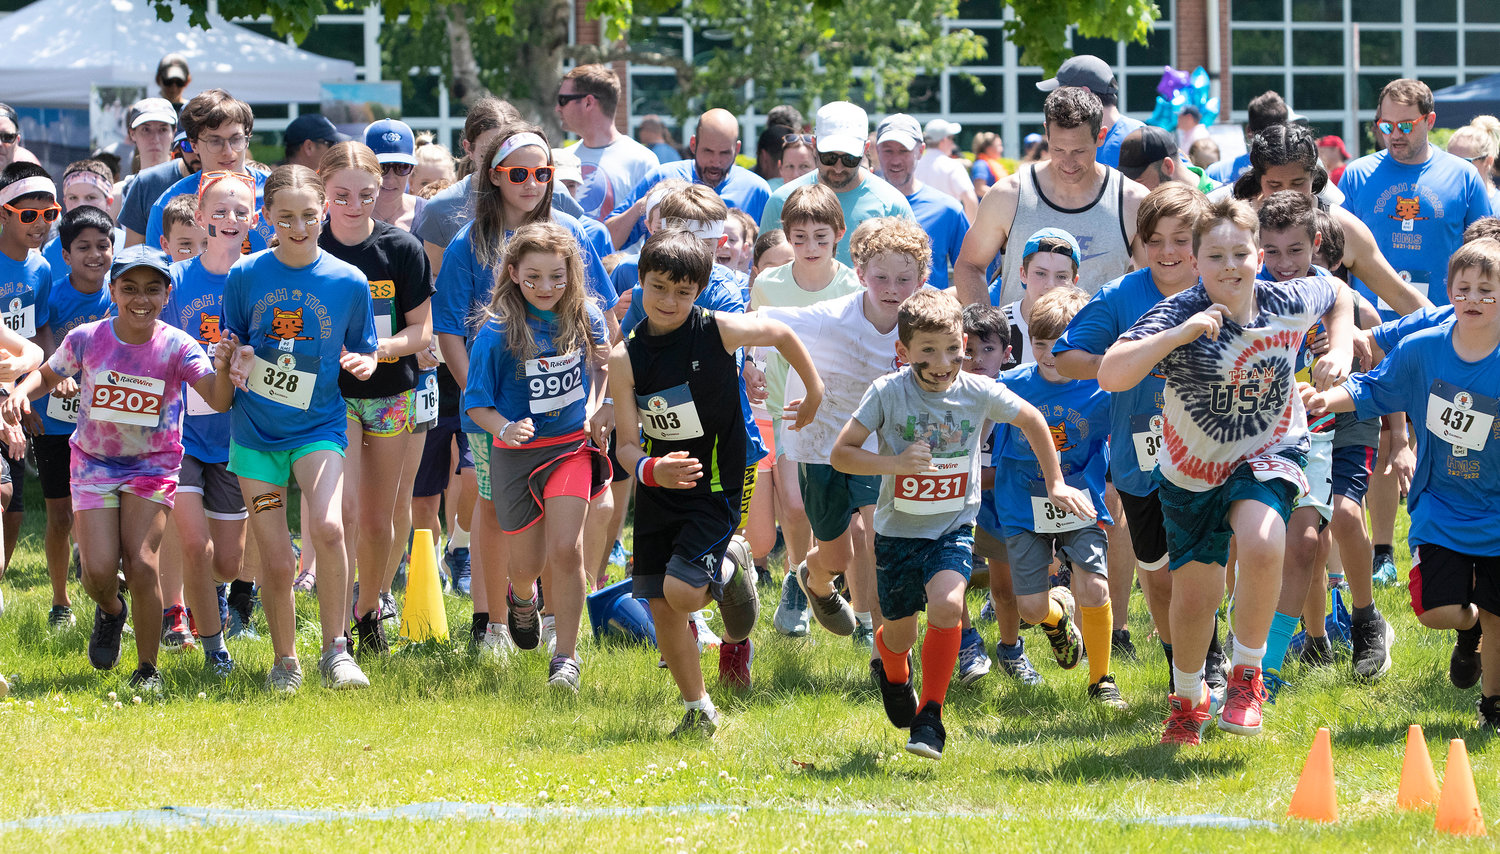 Dozens of competitors break from the starting line at this year’s Tough Tiger adventure race at Hampden Meadows School.